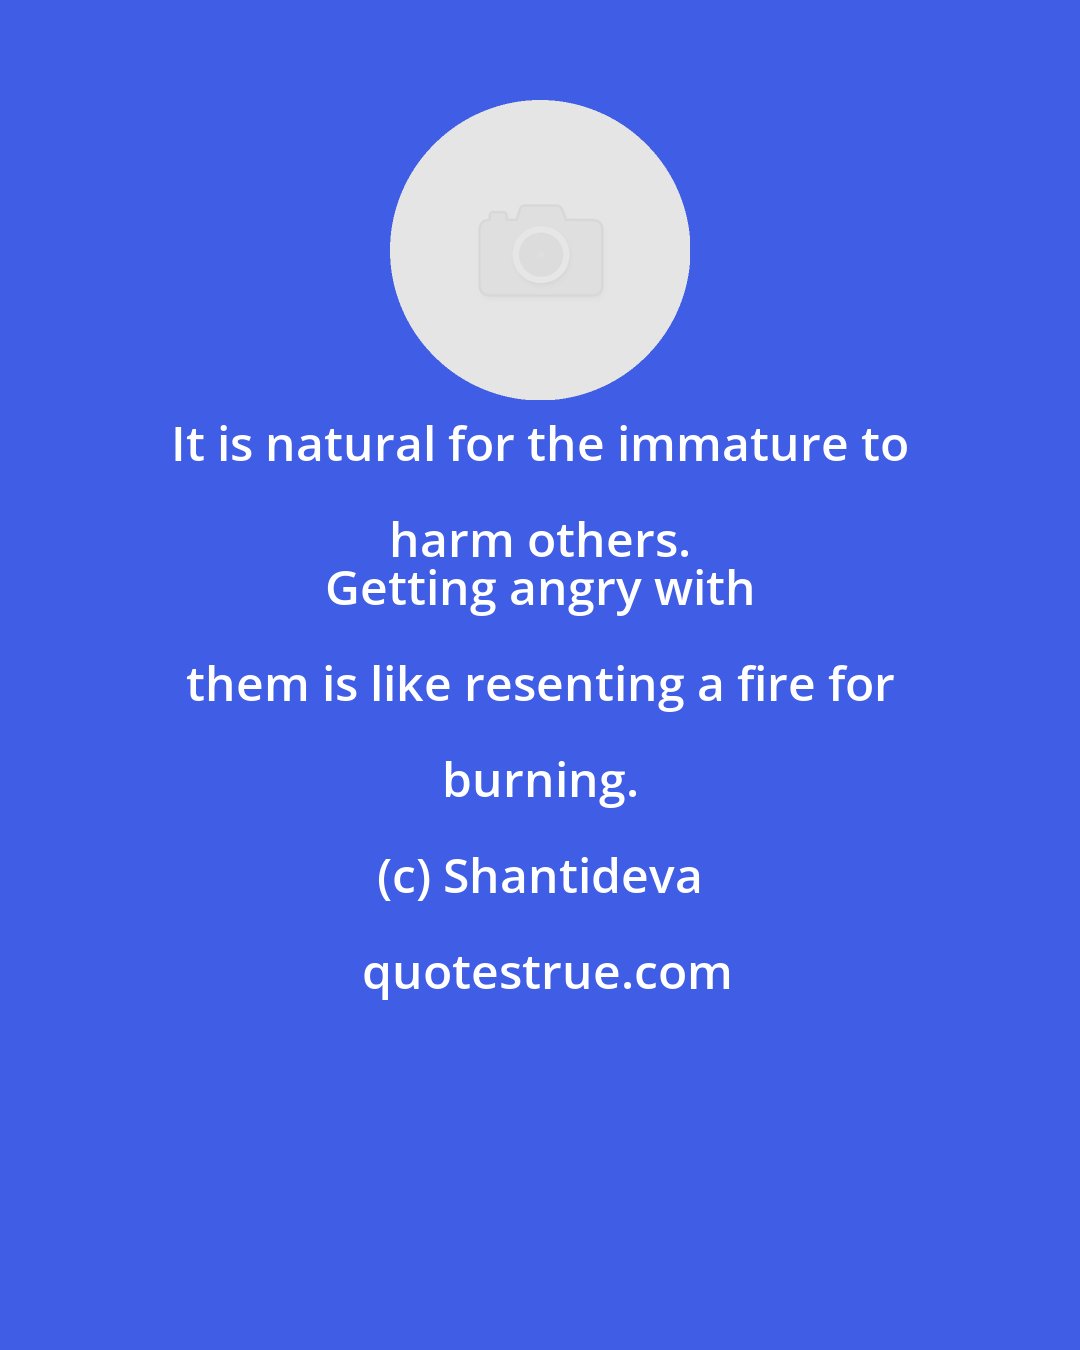 Shantideva: It is natural for the immature to harm others. 
 Getting angry with them is like resenting a fire for burning.